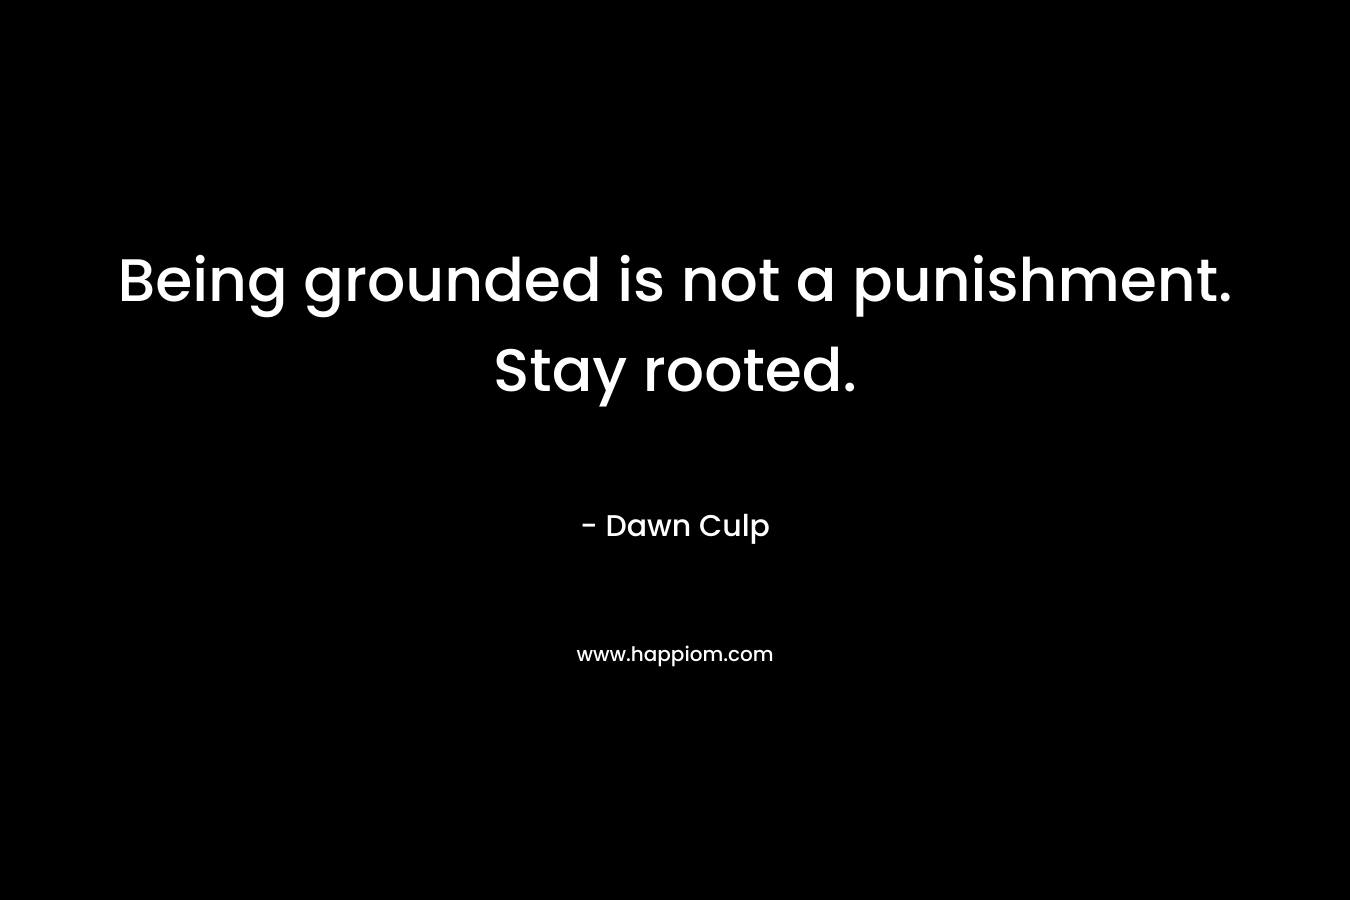 Being grounded is not a punishment. Stay rooted.